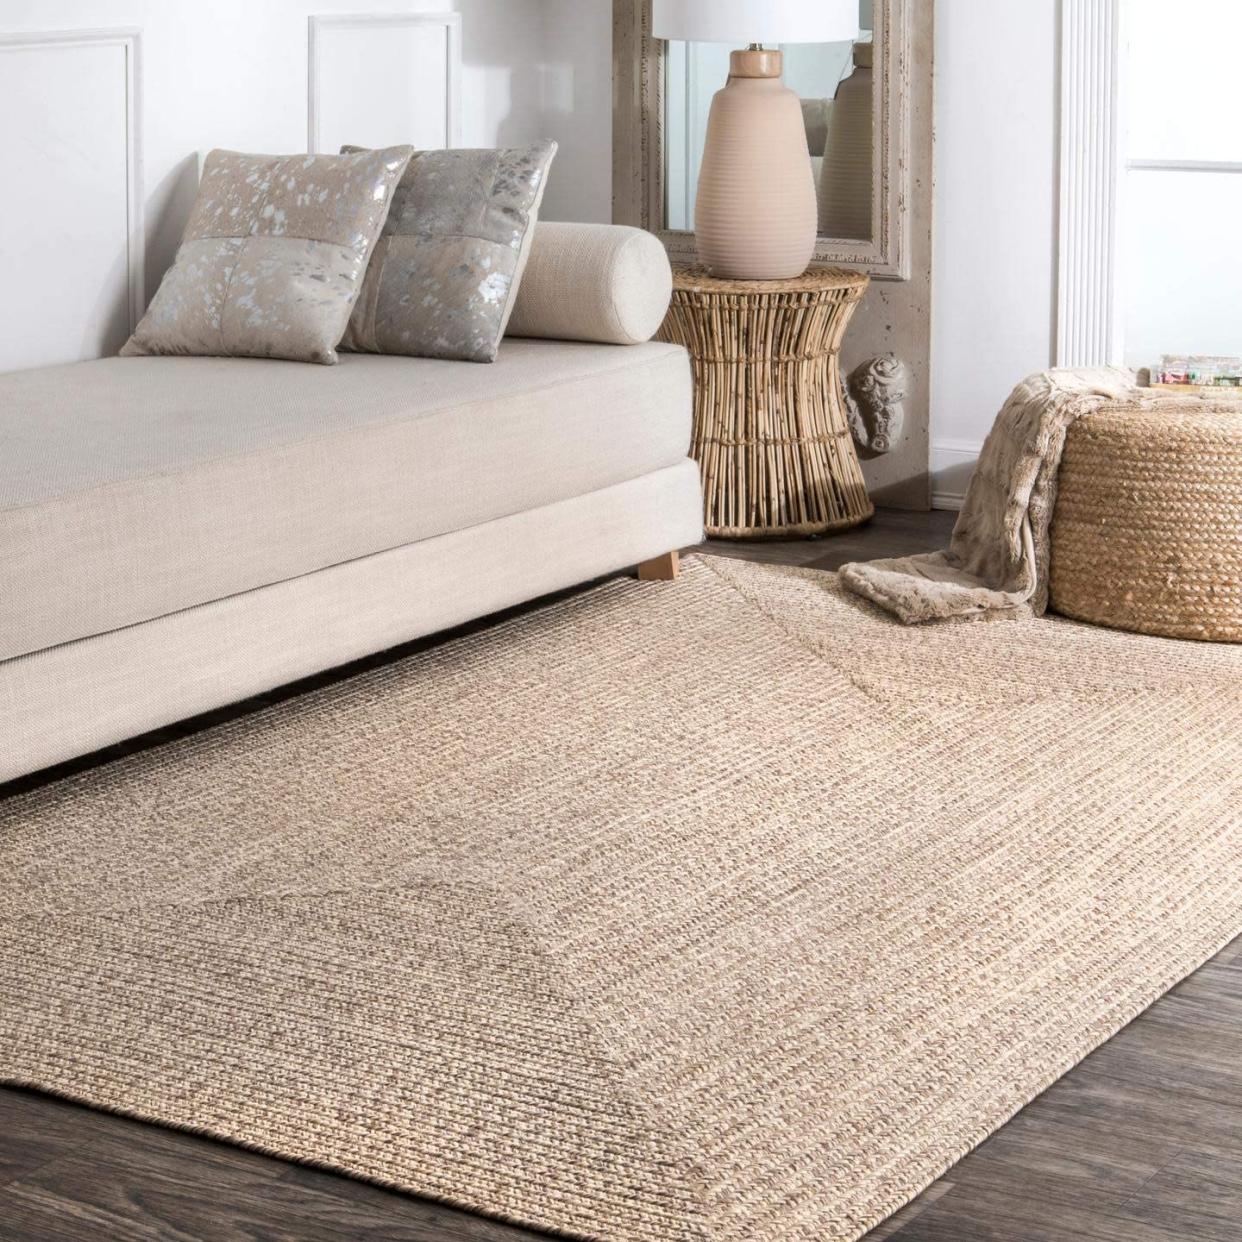 prime day deals, nuloom braided rug in neutral